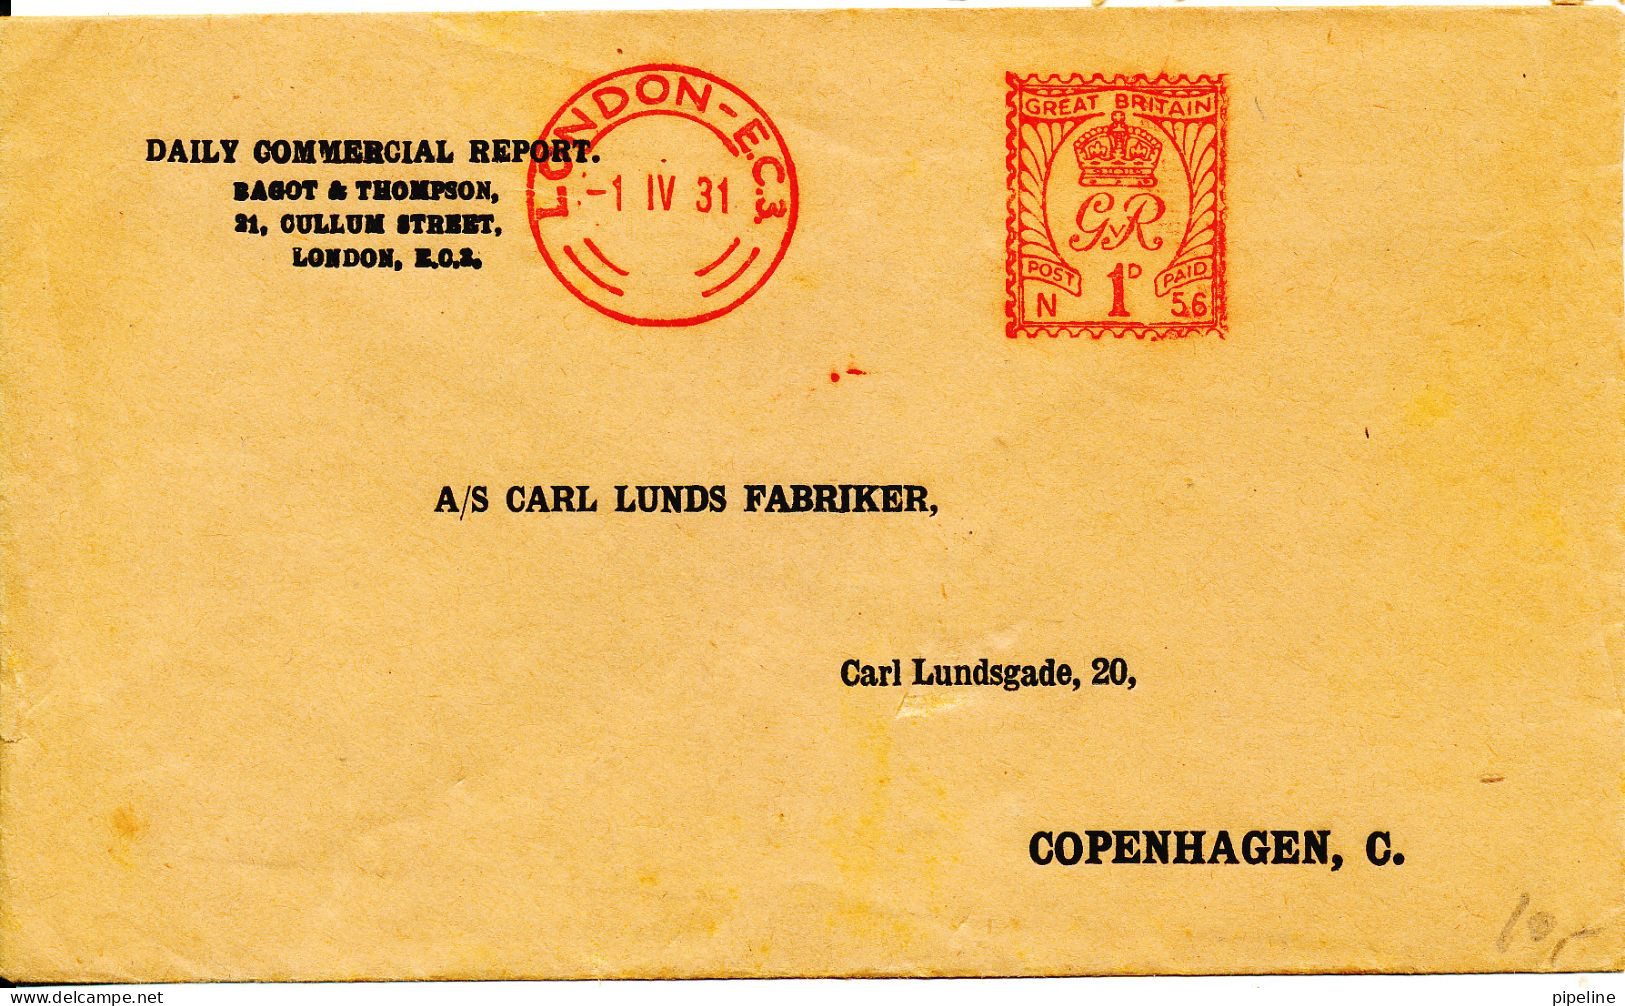 Great Britain Cover With Red Meter Cancel London 2-4-1931 Sent To Denmark - Covers & Documents